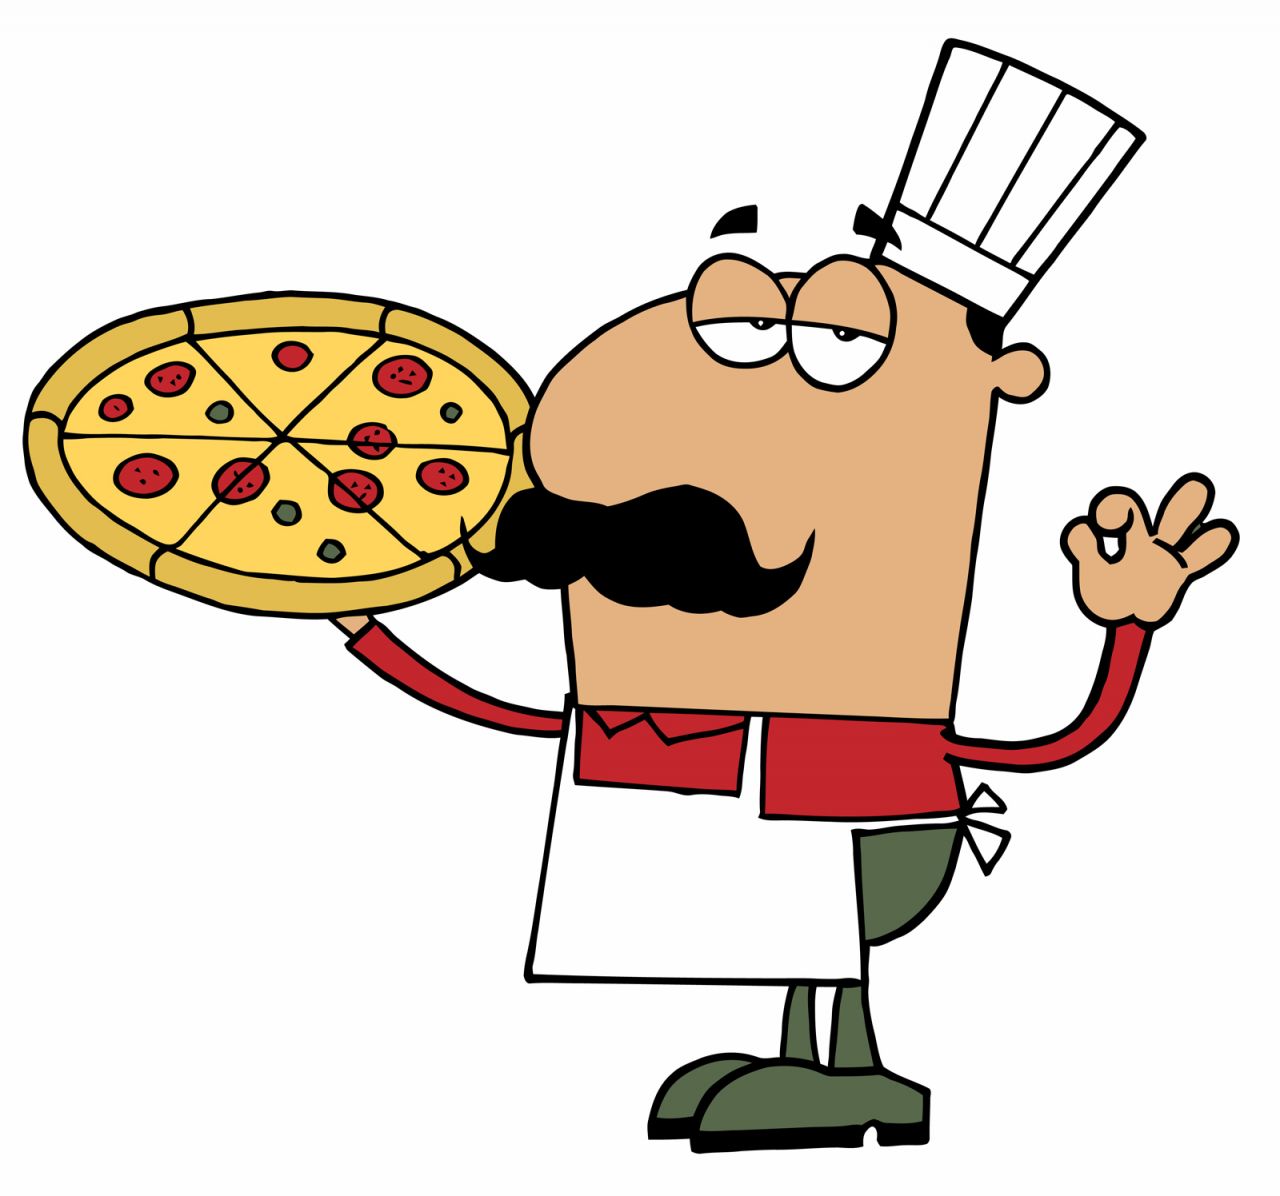 Pizza Party Clip Art - Free Clipart Images